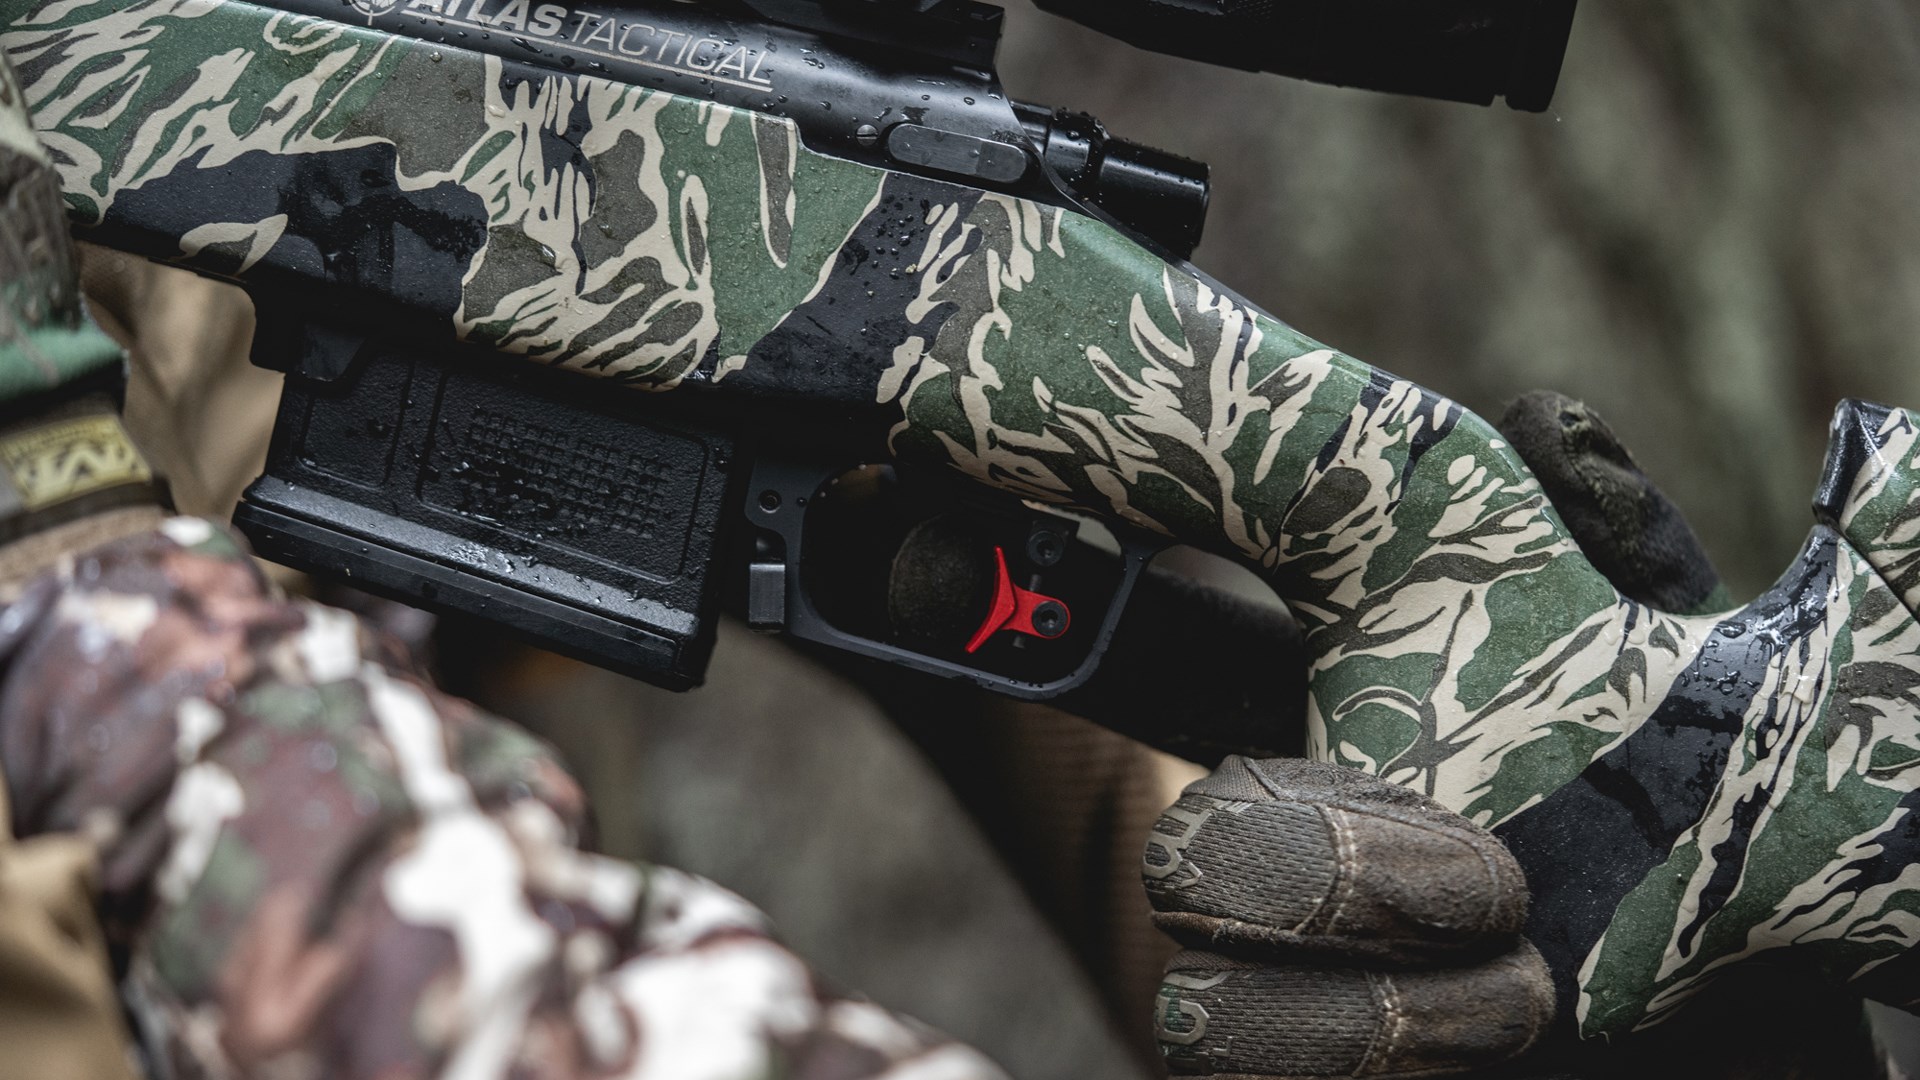 Left-side view of camouflage atlas bolt-aciton rifle with focus on timney calvin elite adjustable two-stage trigger red highlight